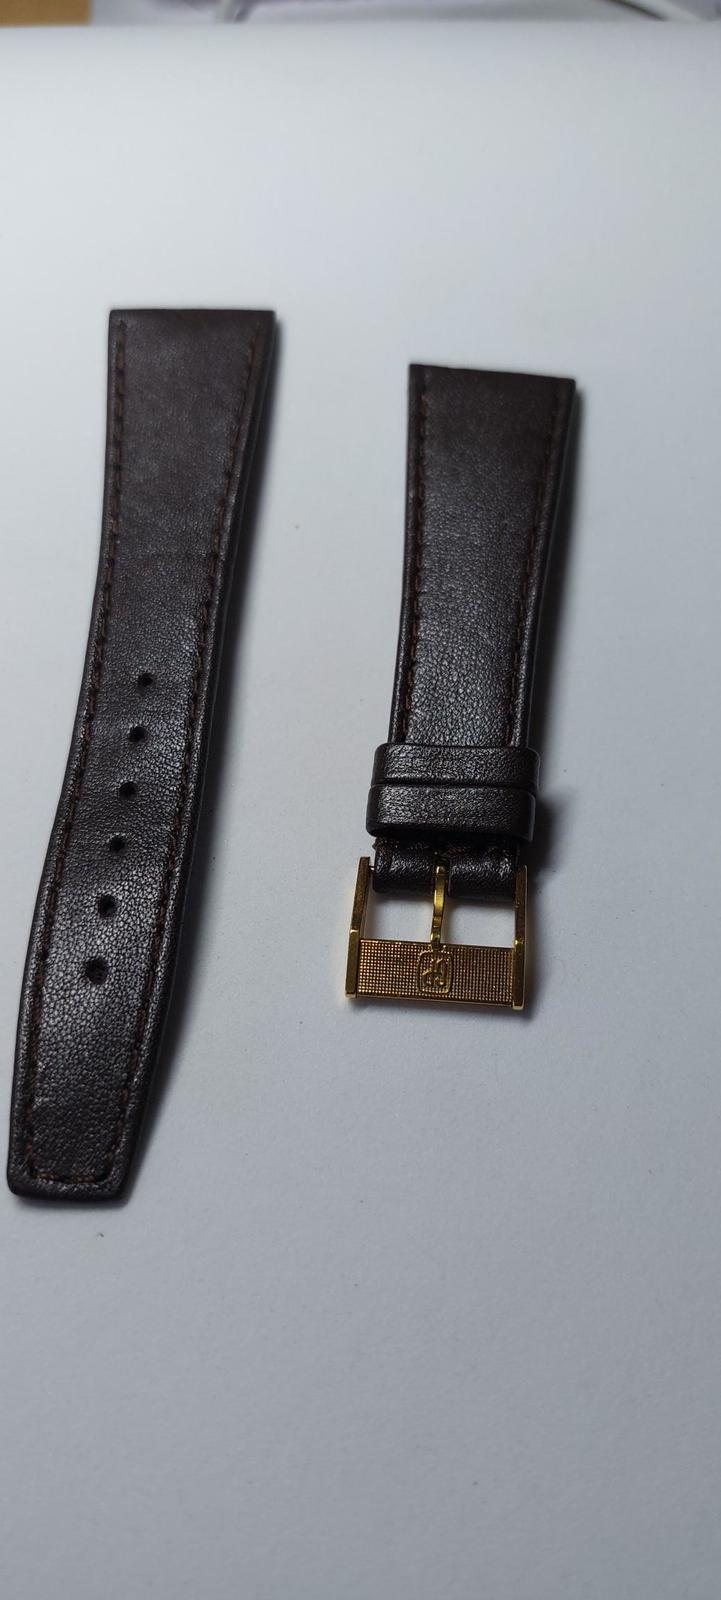 Strap Girard Perregaux leather Camel 20mm 14mm 105mm 65mm - $260.00